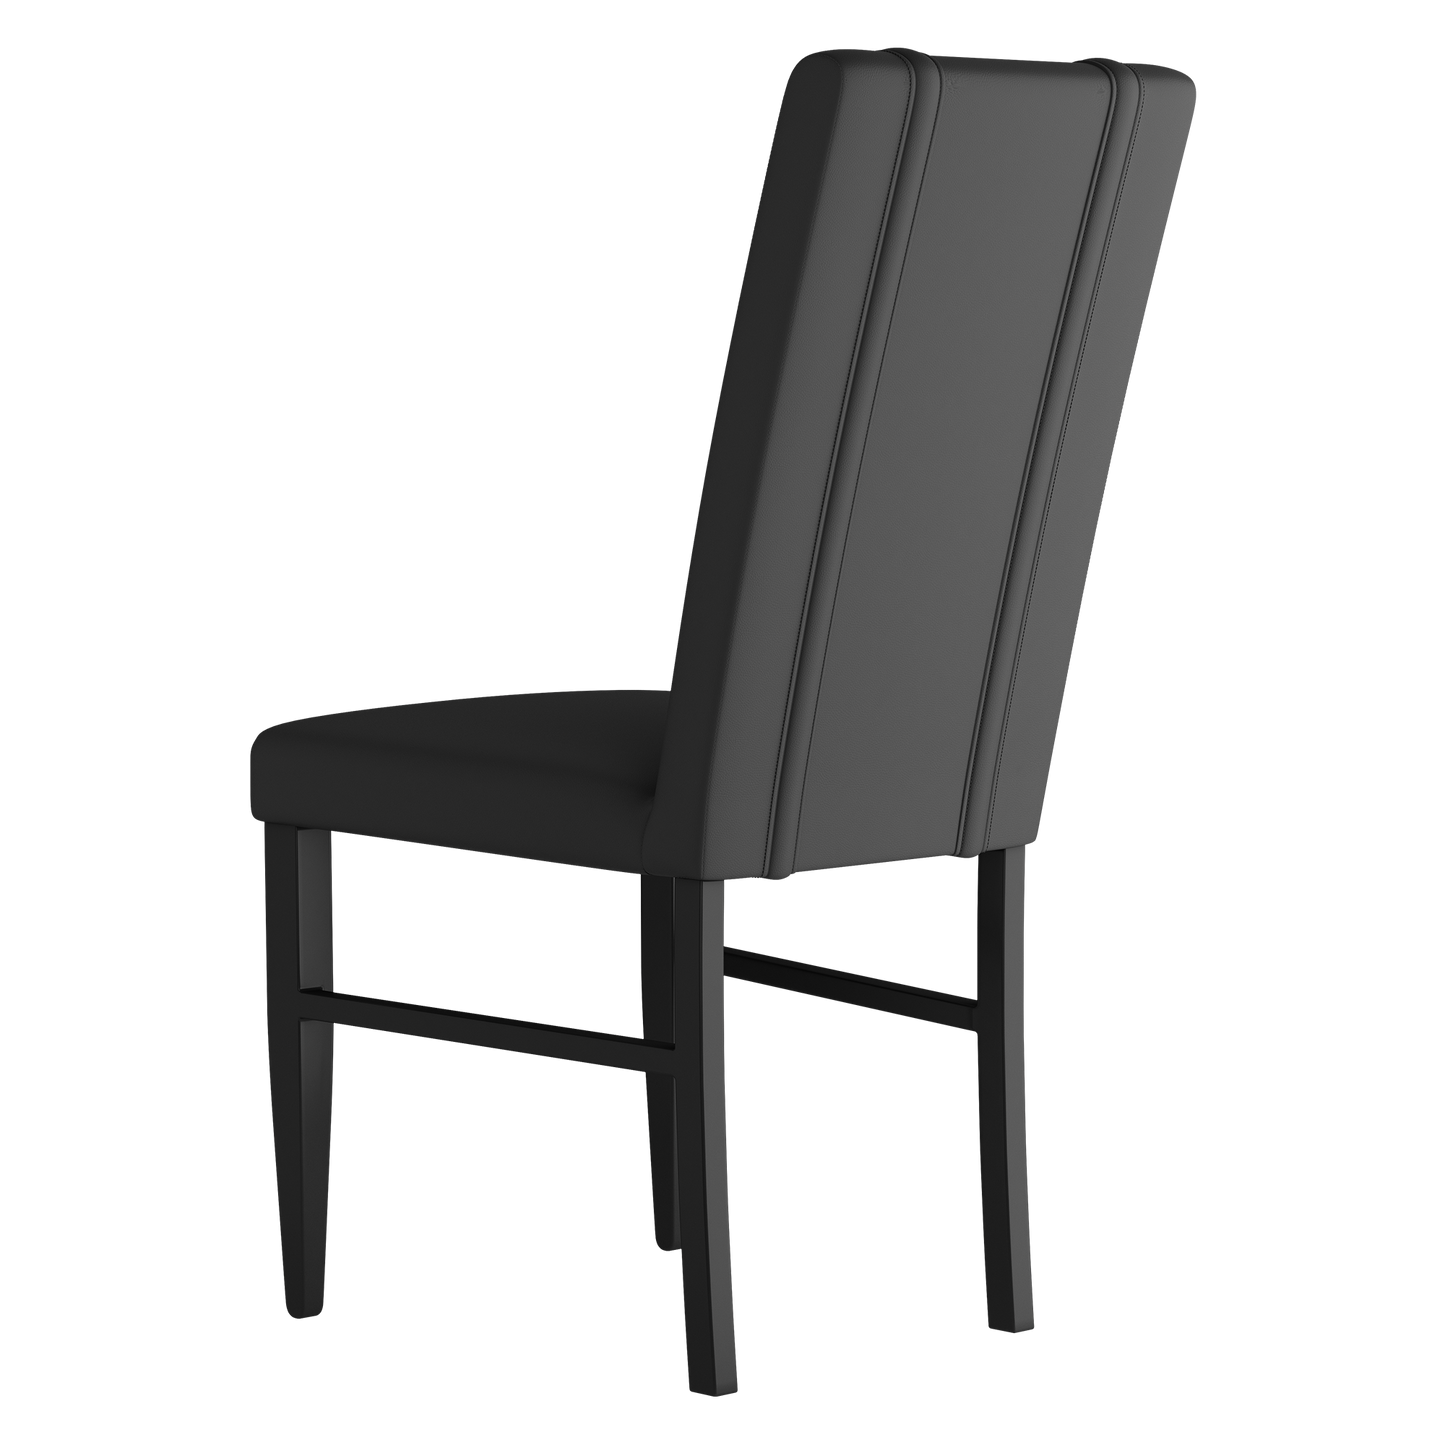 Side Chair 2000 with Denver Nuggets Secondary Logo Set of 2